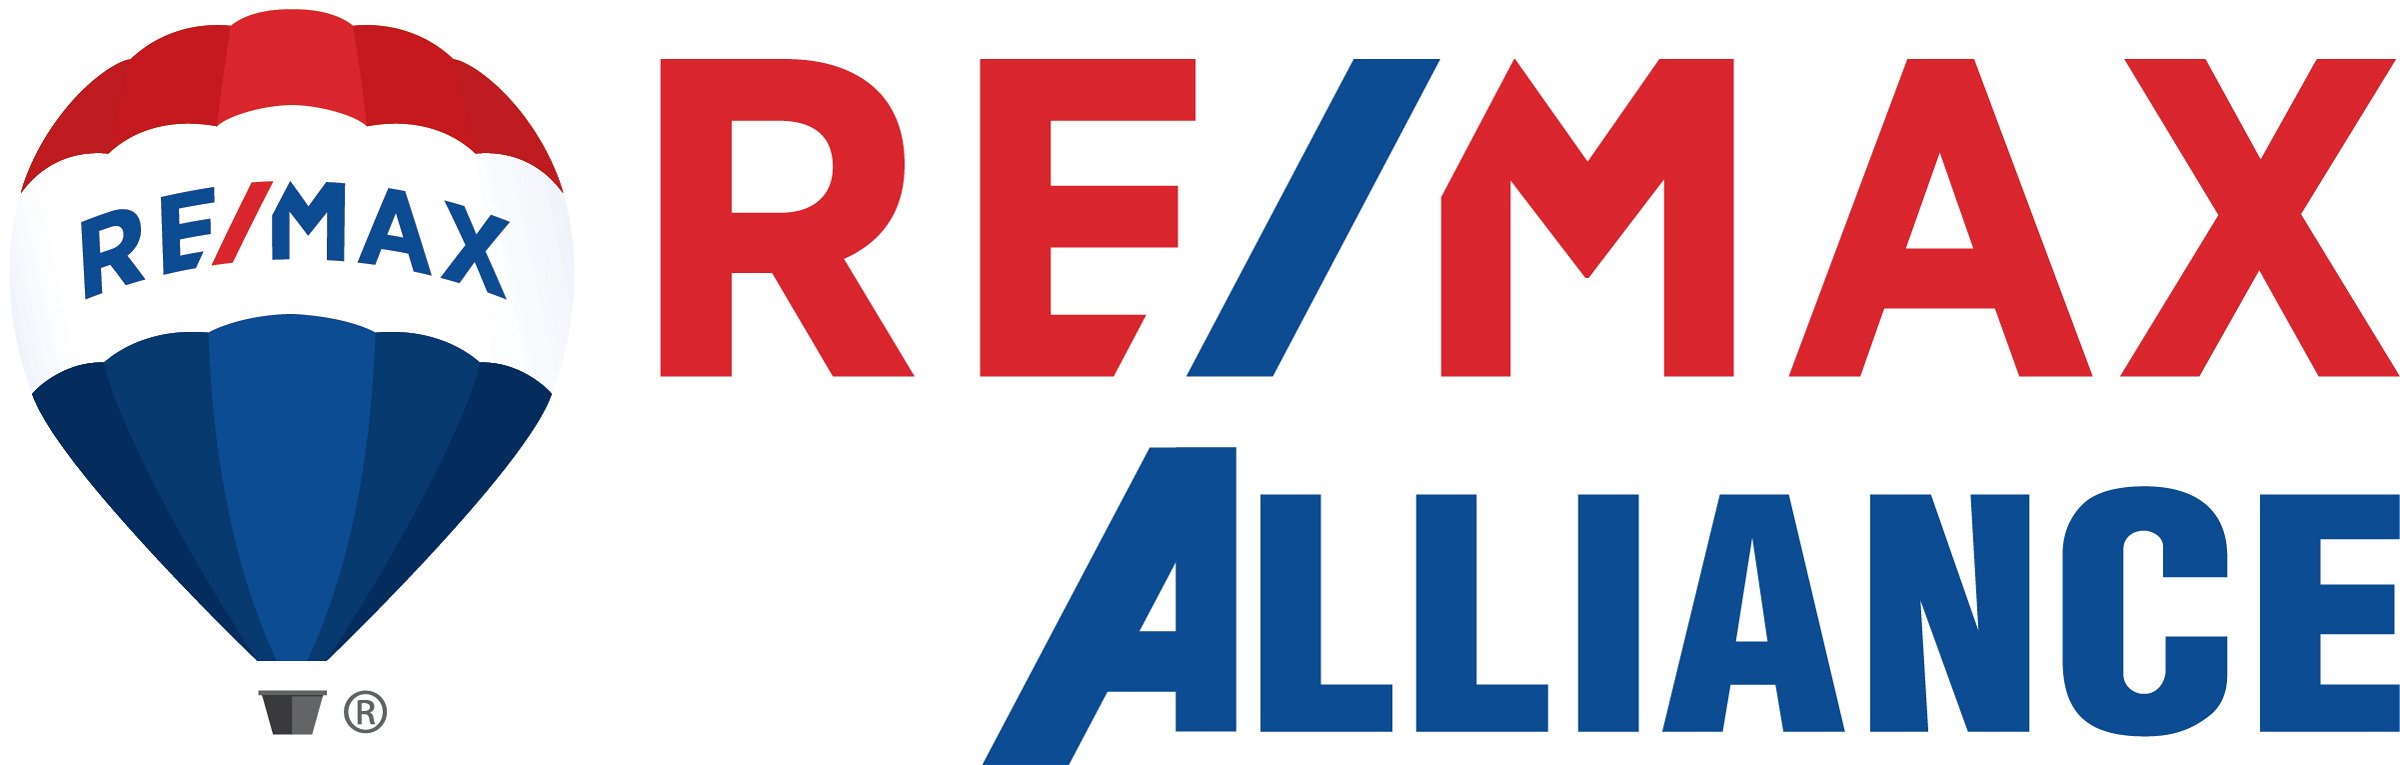 remax-alliance-with-balloon